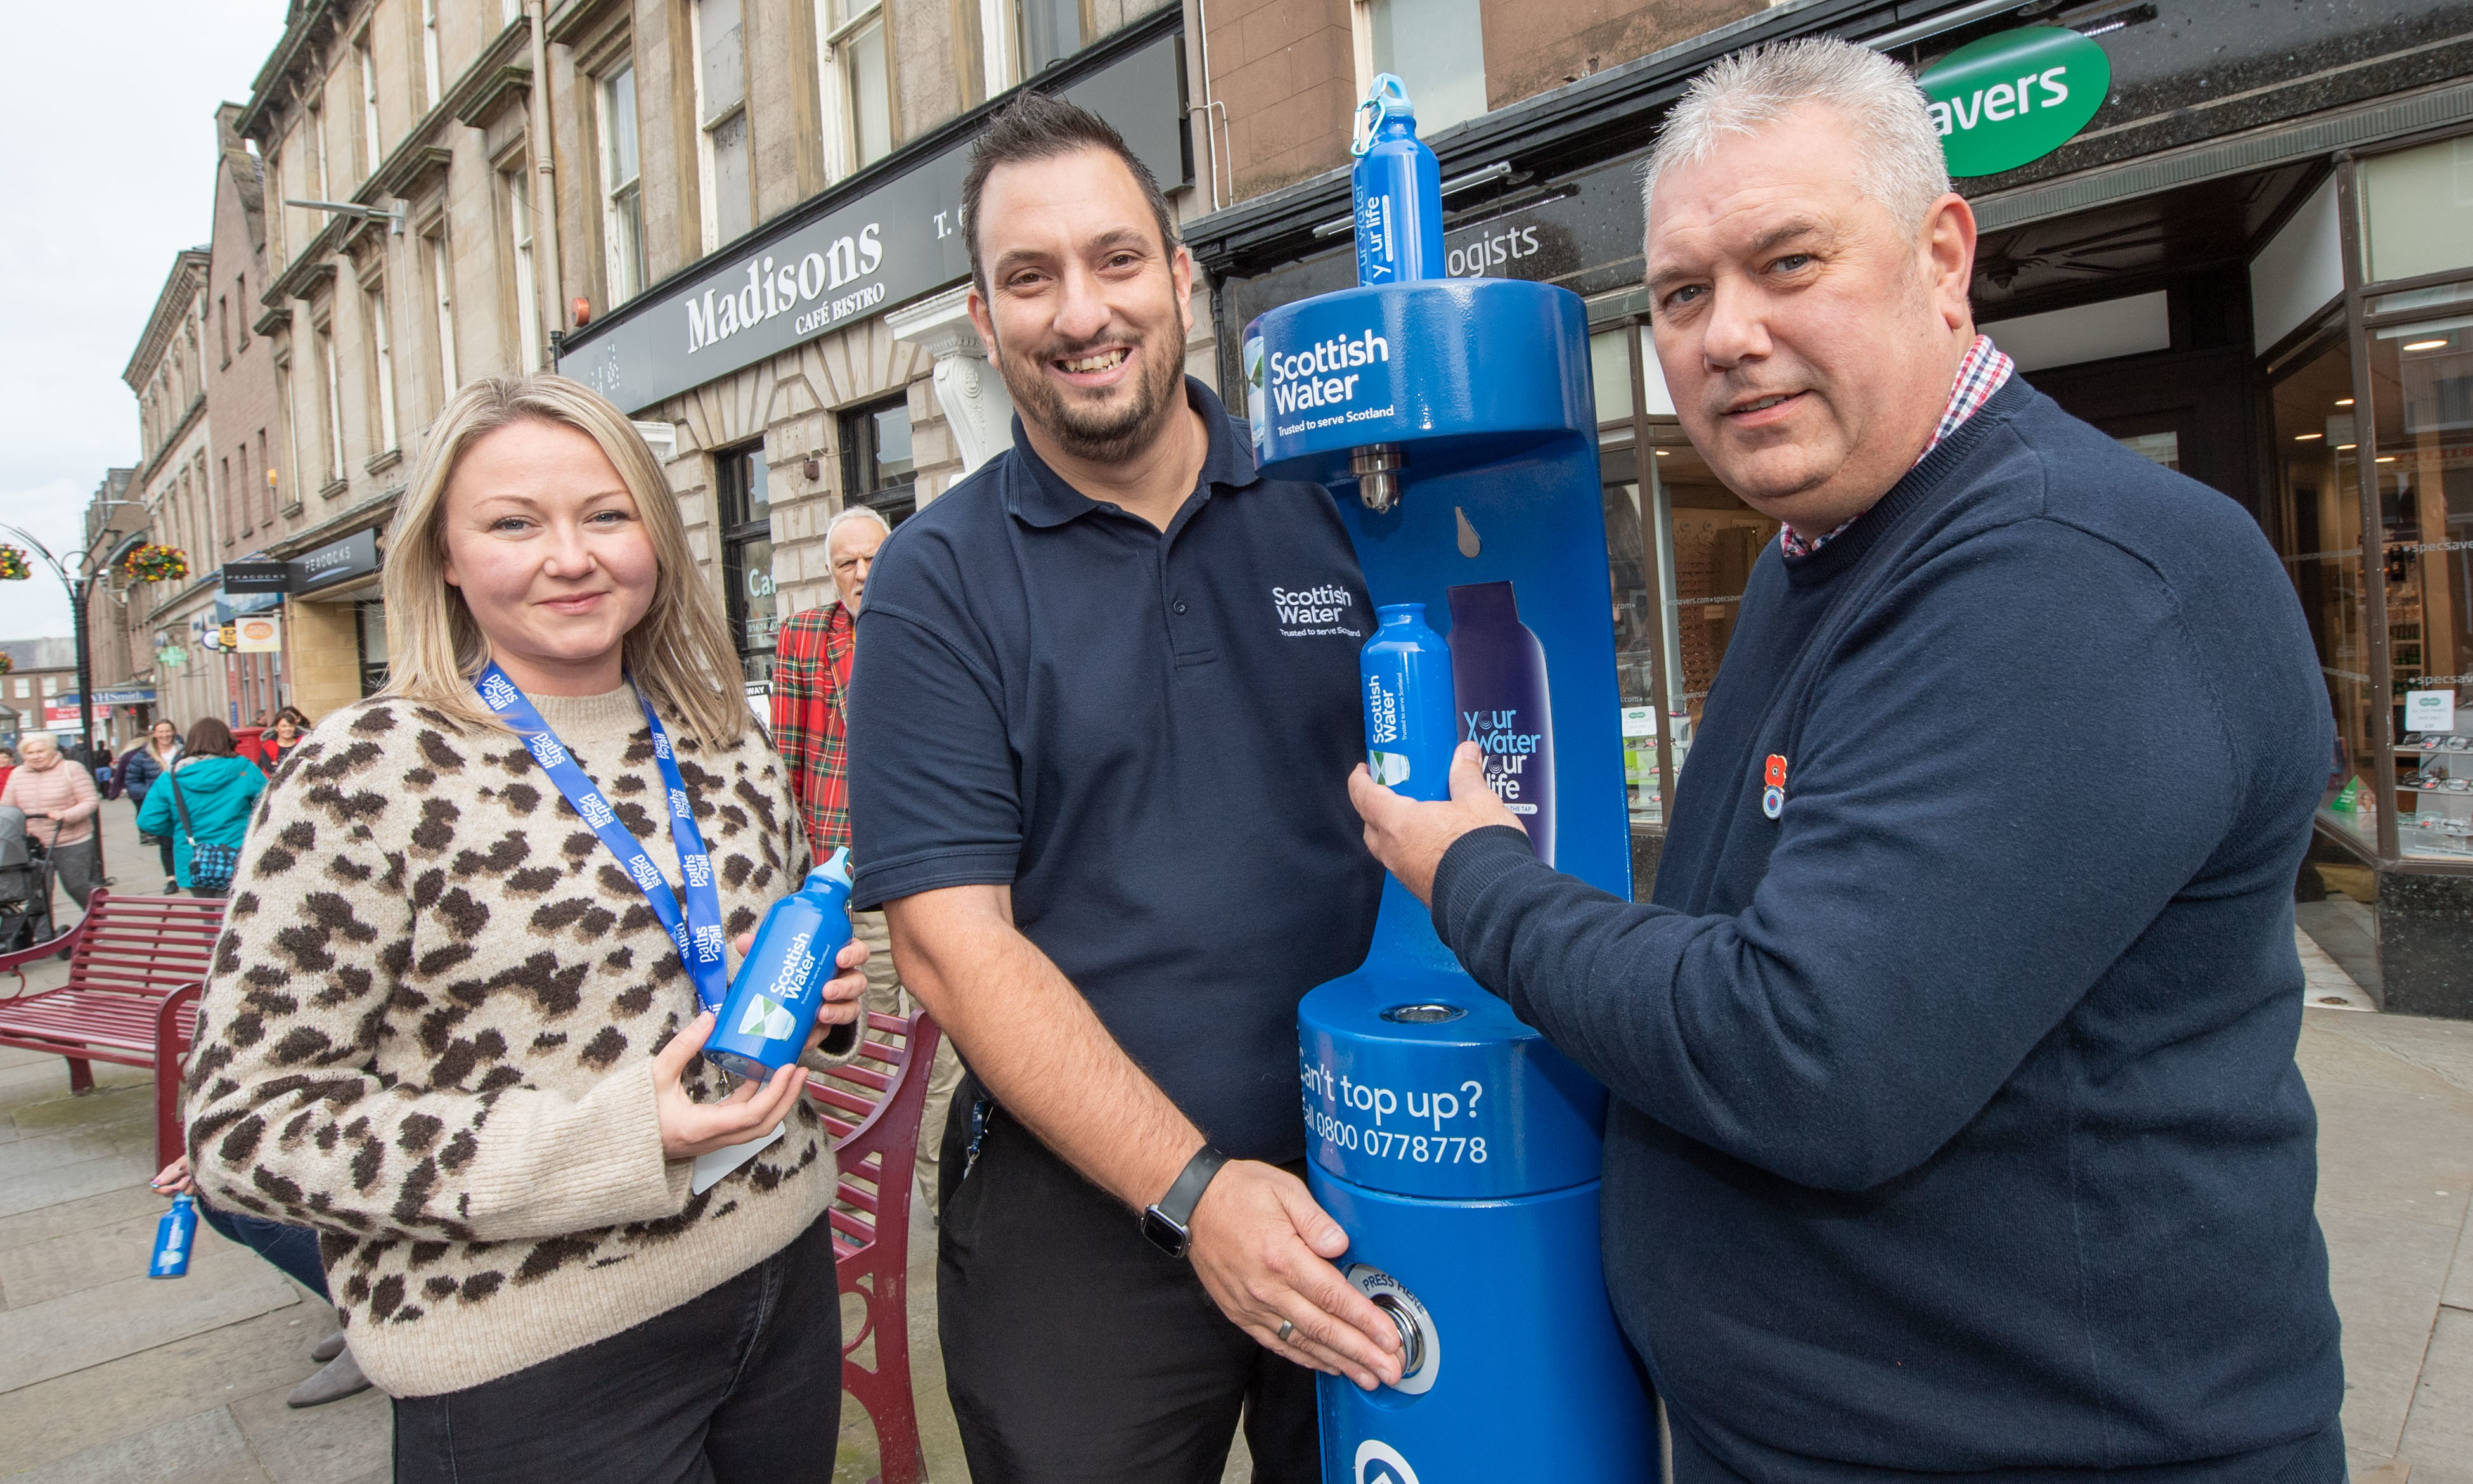 Walk and Talk Co-ordinator Gemma Lownie, Clive Duncan of Scottish Water and Montrose Independent councillor Tommy Stewart pictured at the new Top Up Tap on Montrose High Street
Picture by Abermedia / Michal Wachucik